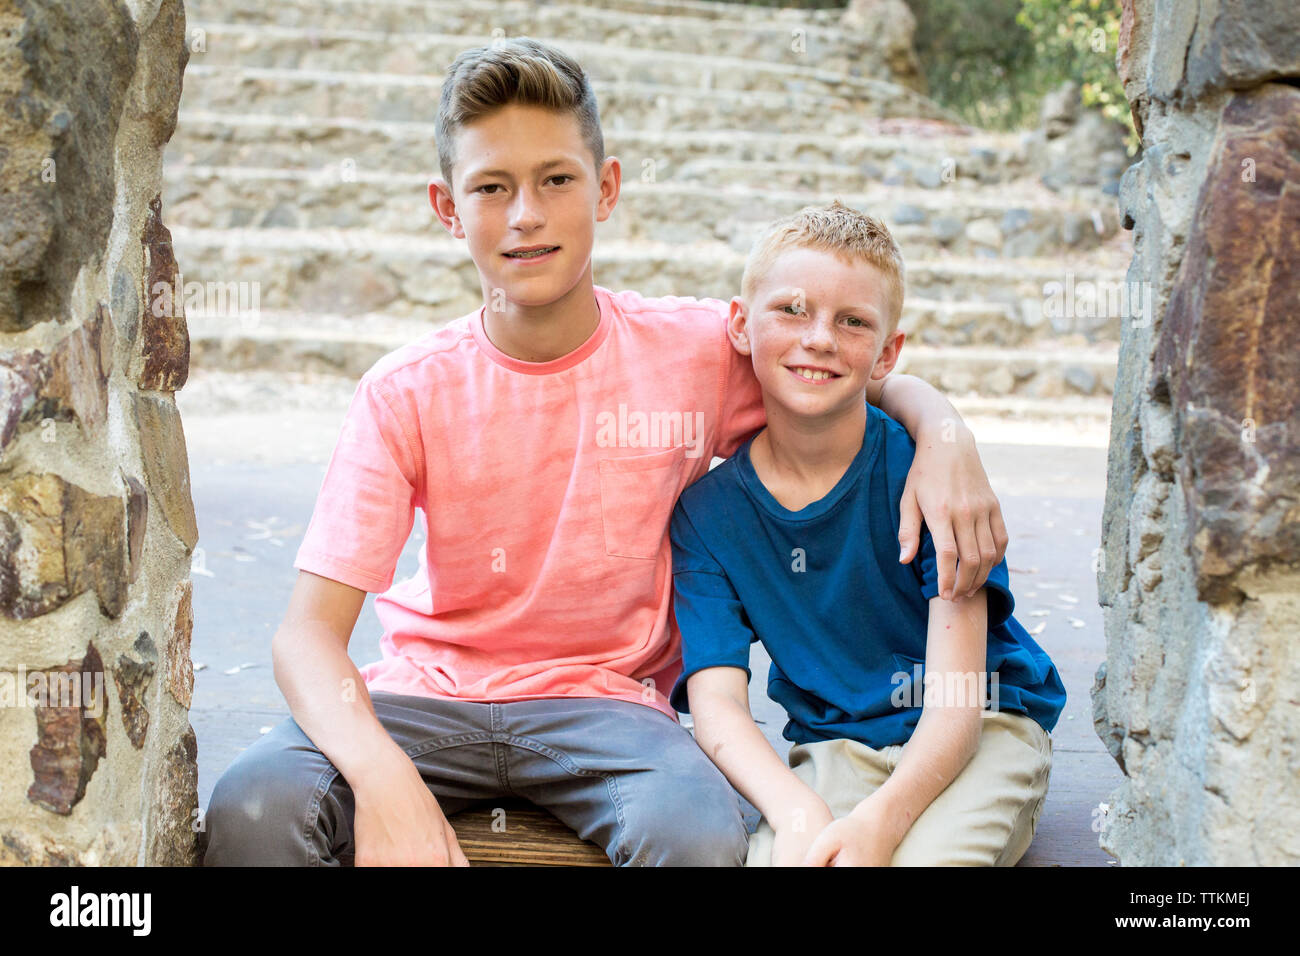 Older brother with arm around younger brother sit for portrait Stock Photo